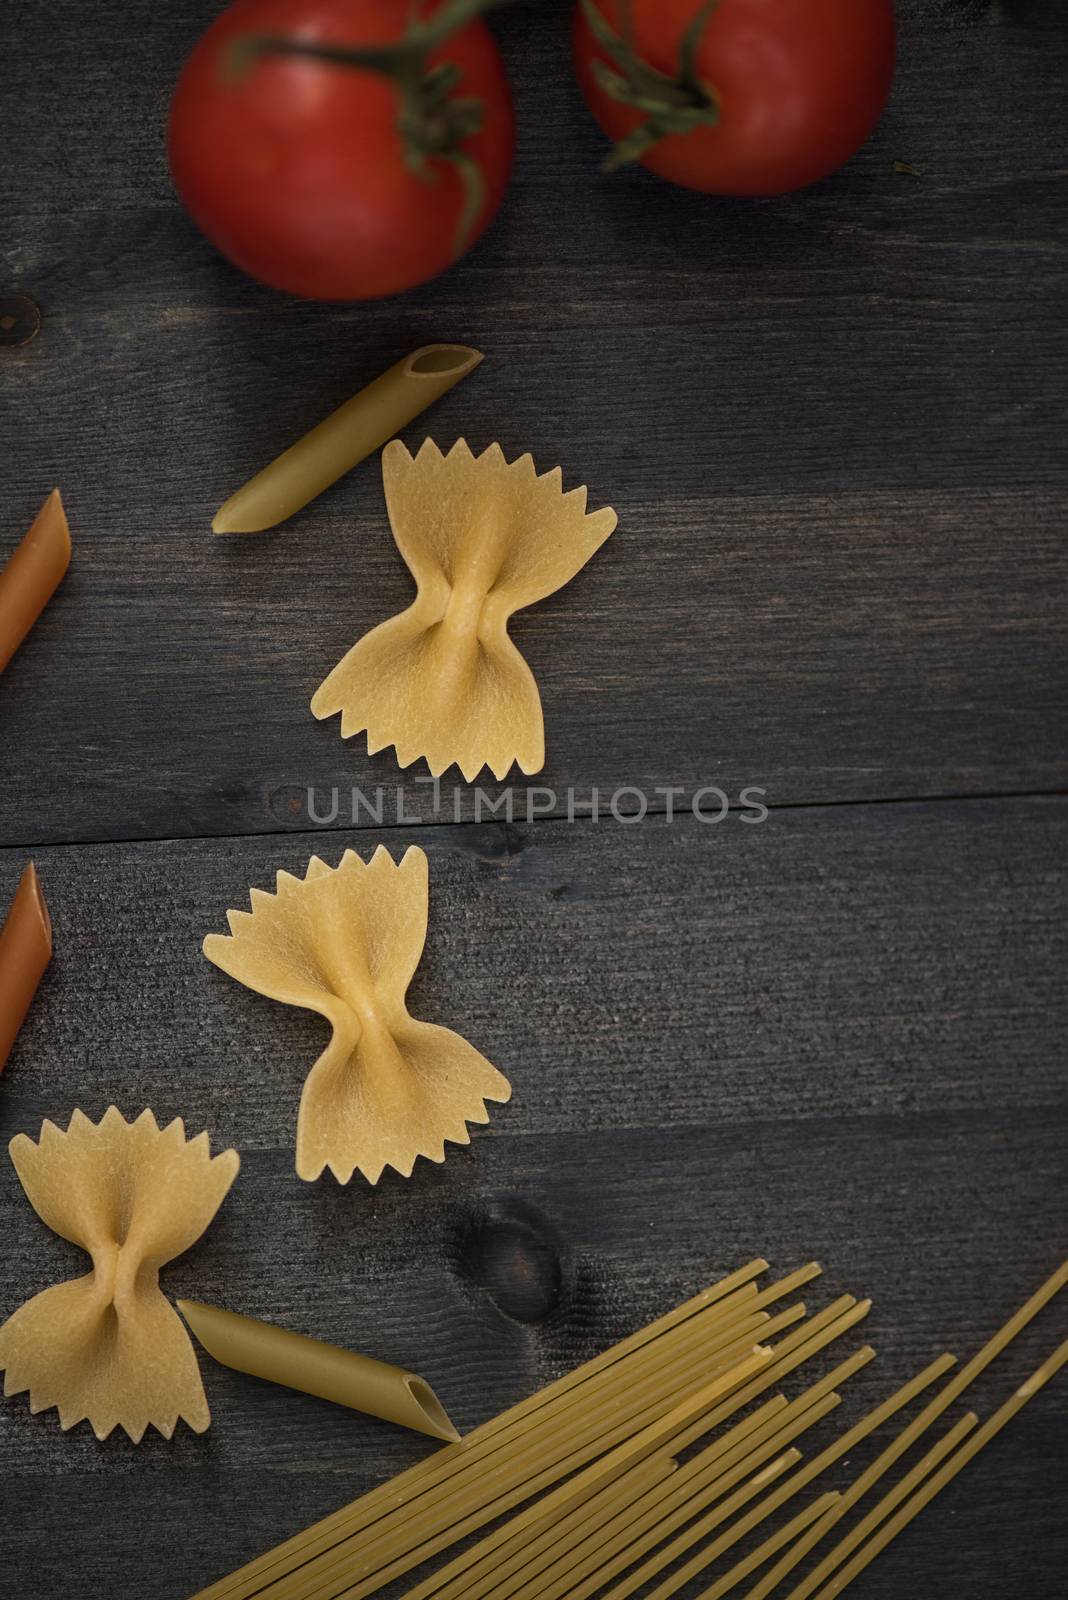 food background on rustic wood with pasta and tomatoes